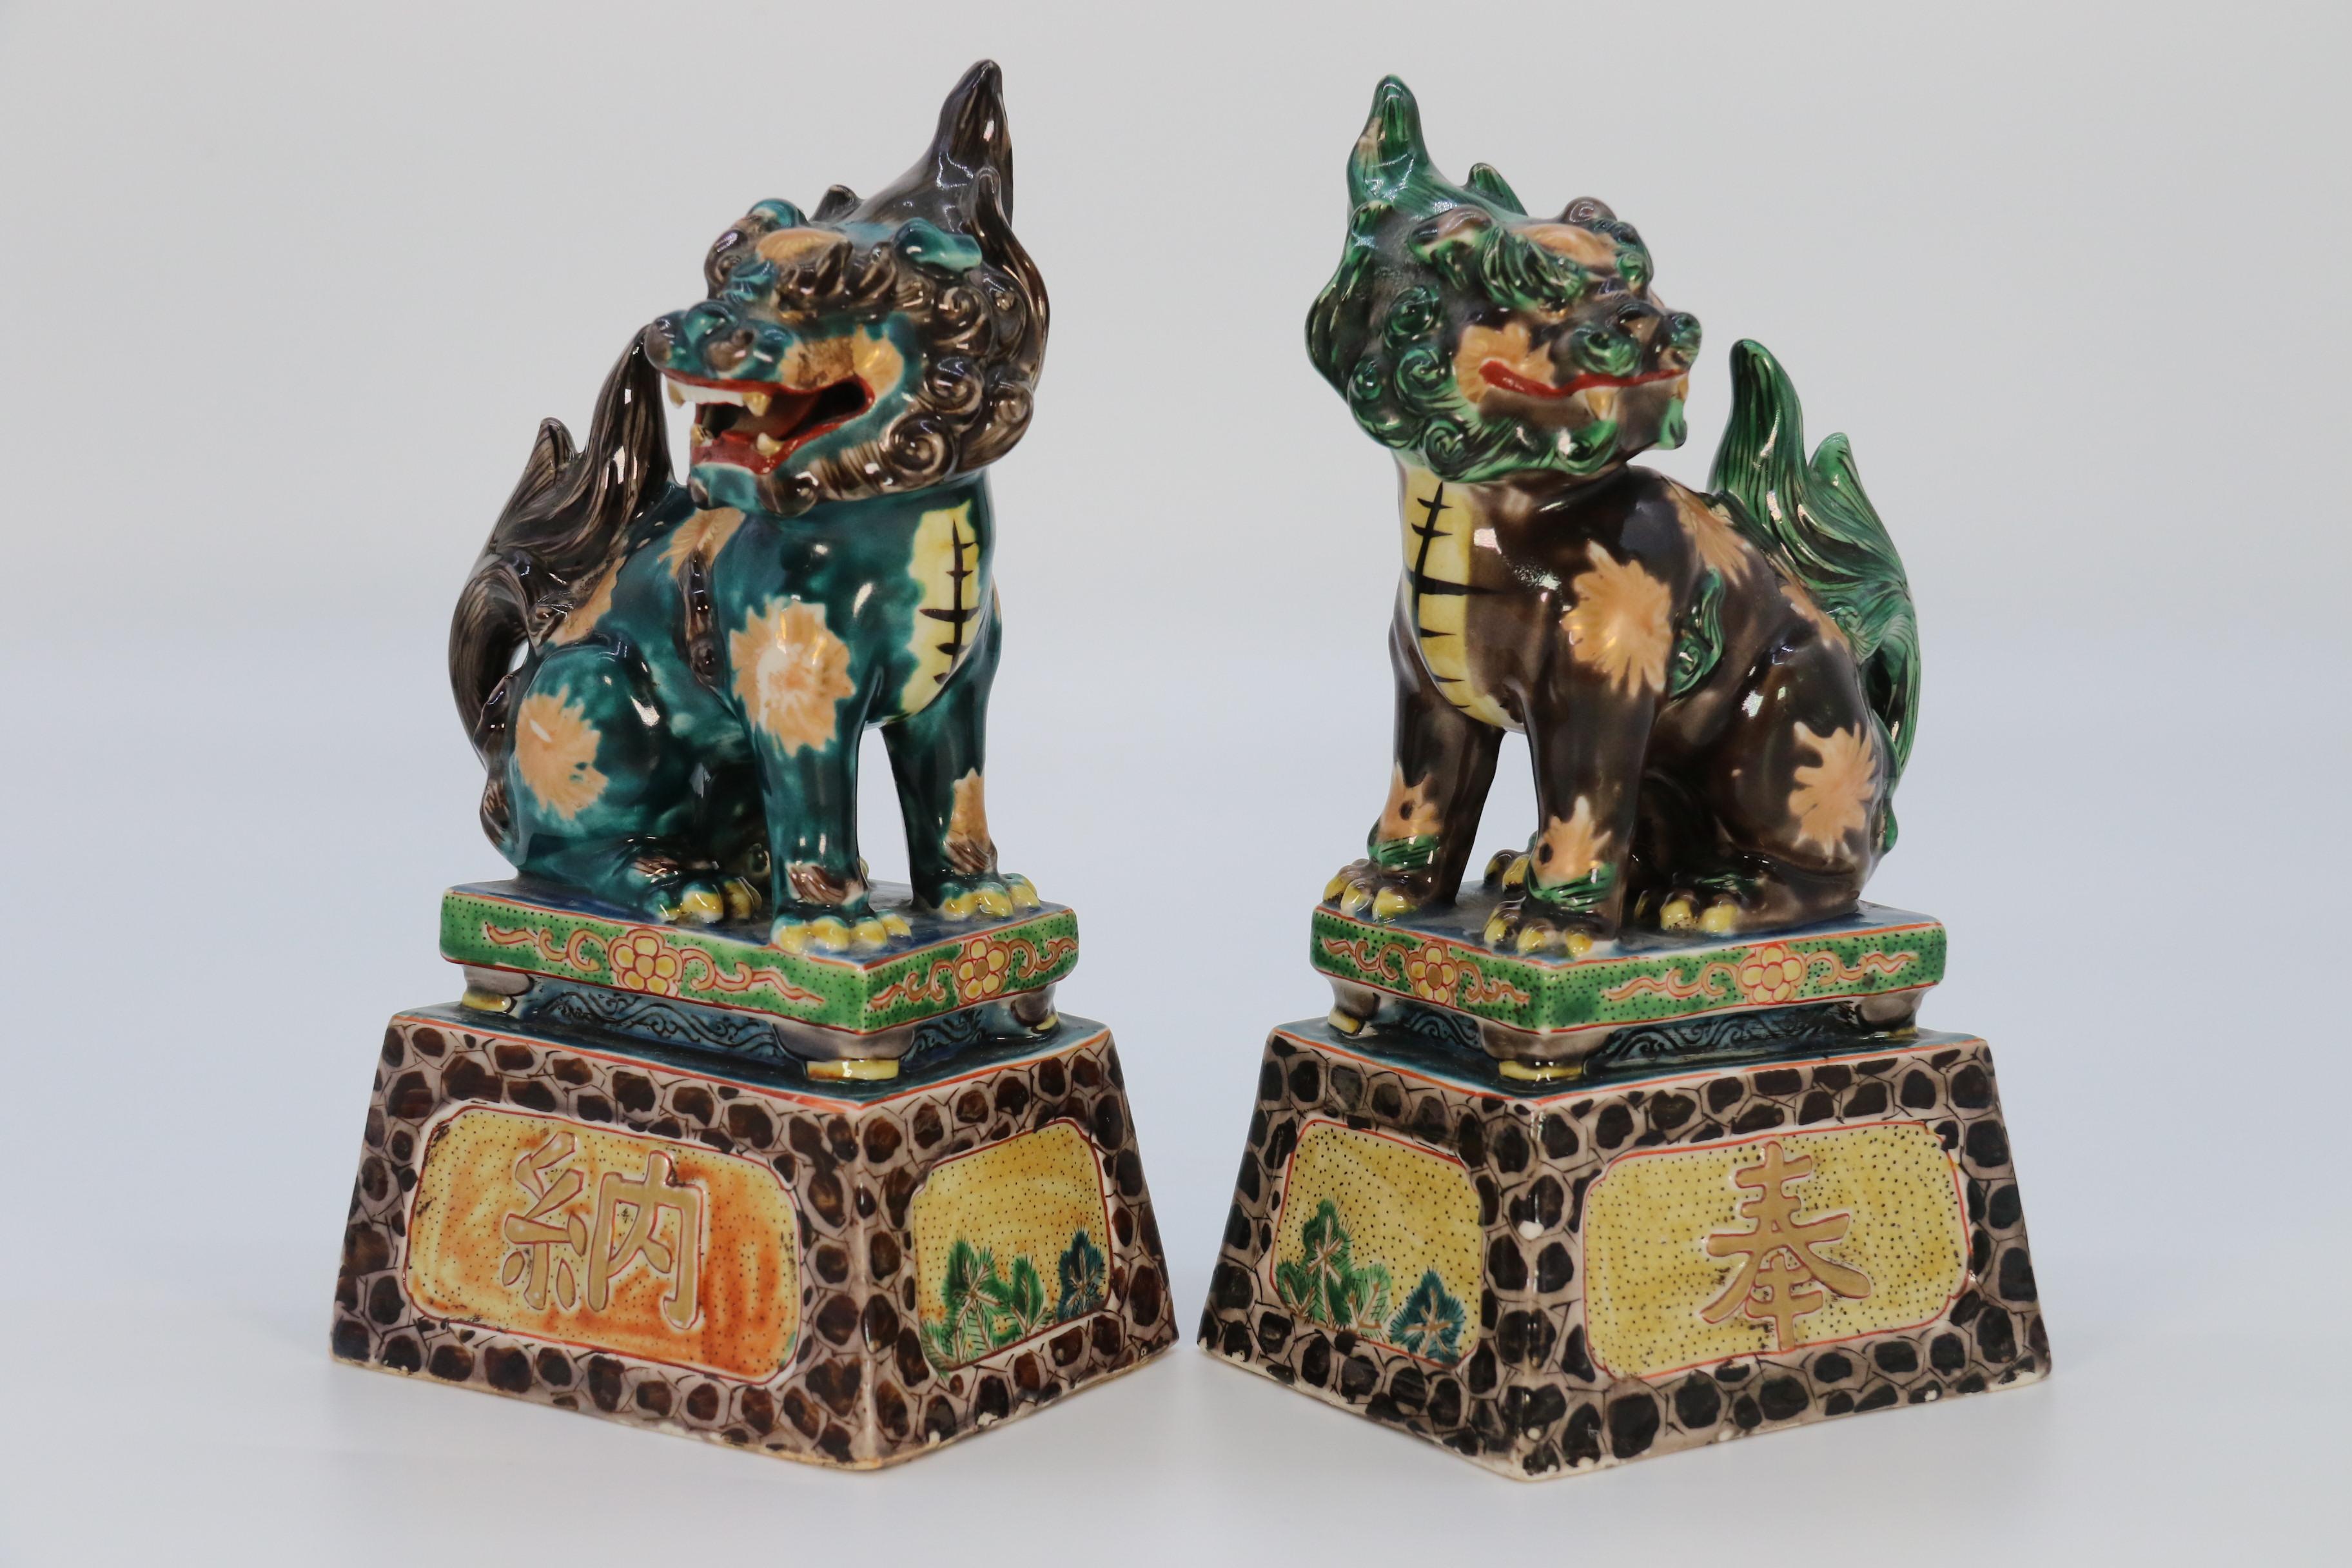 An unusual pair of 19th century Chinese hand painted and richly glazed pottery seated Buddhist lions. They are each raised onto a stepped plinth with gilt character marks on the front face with bamboo and foliage around the sides and back on pale